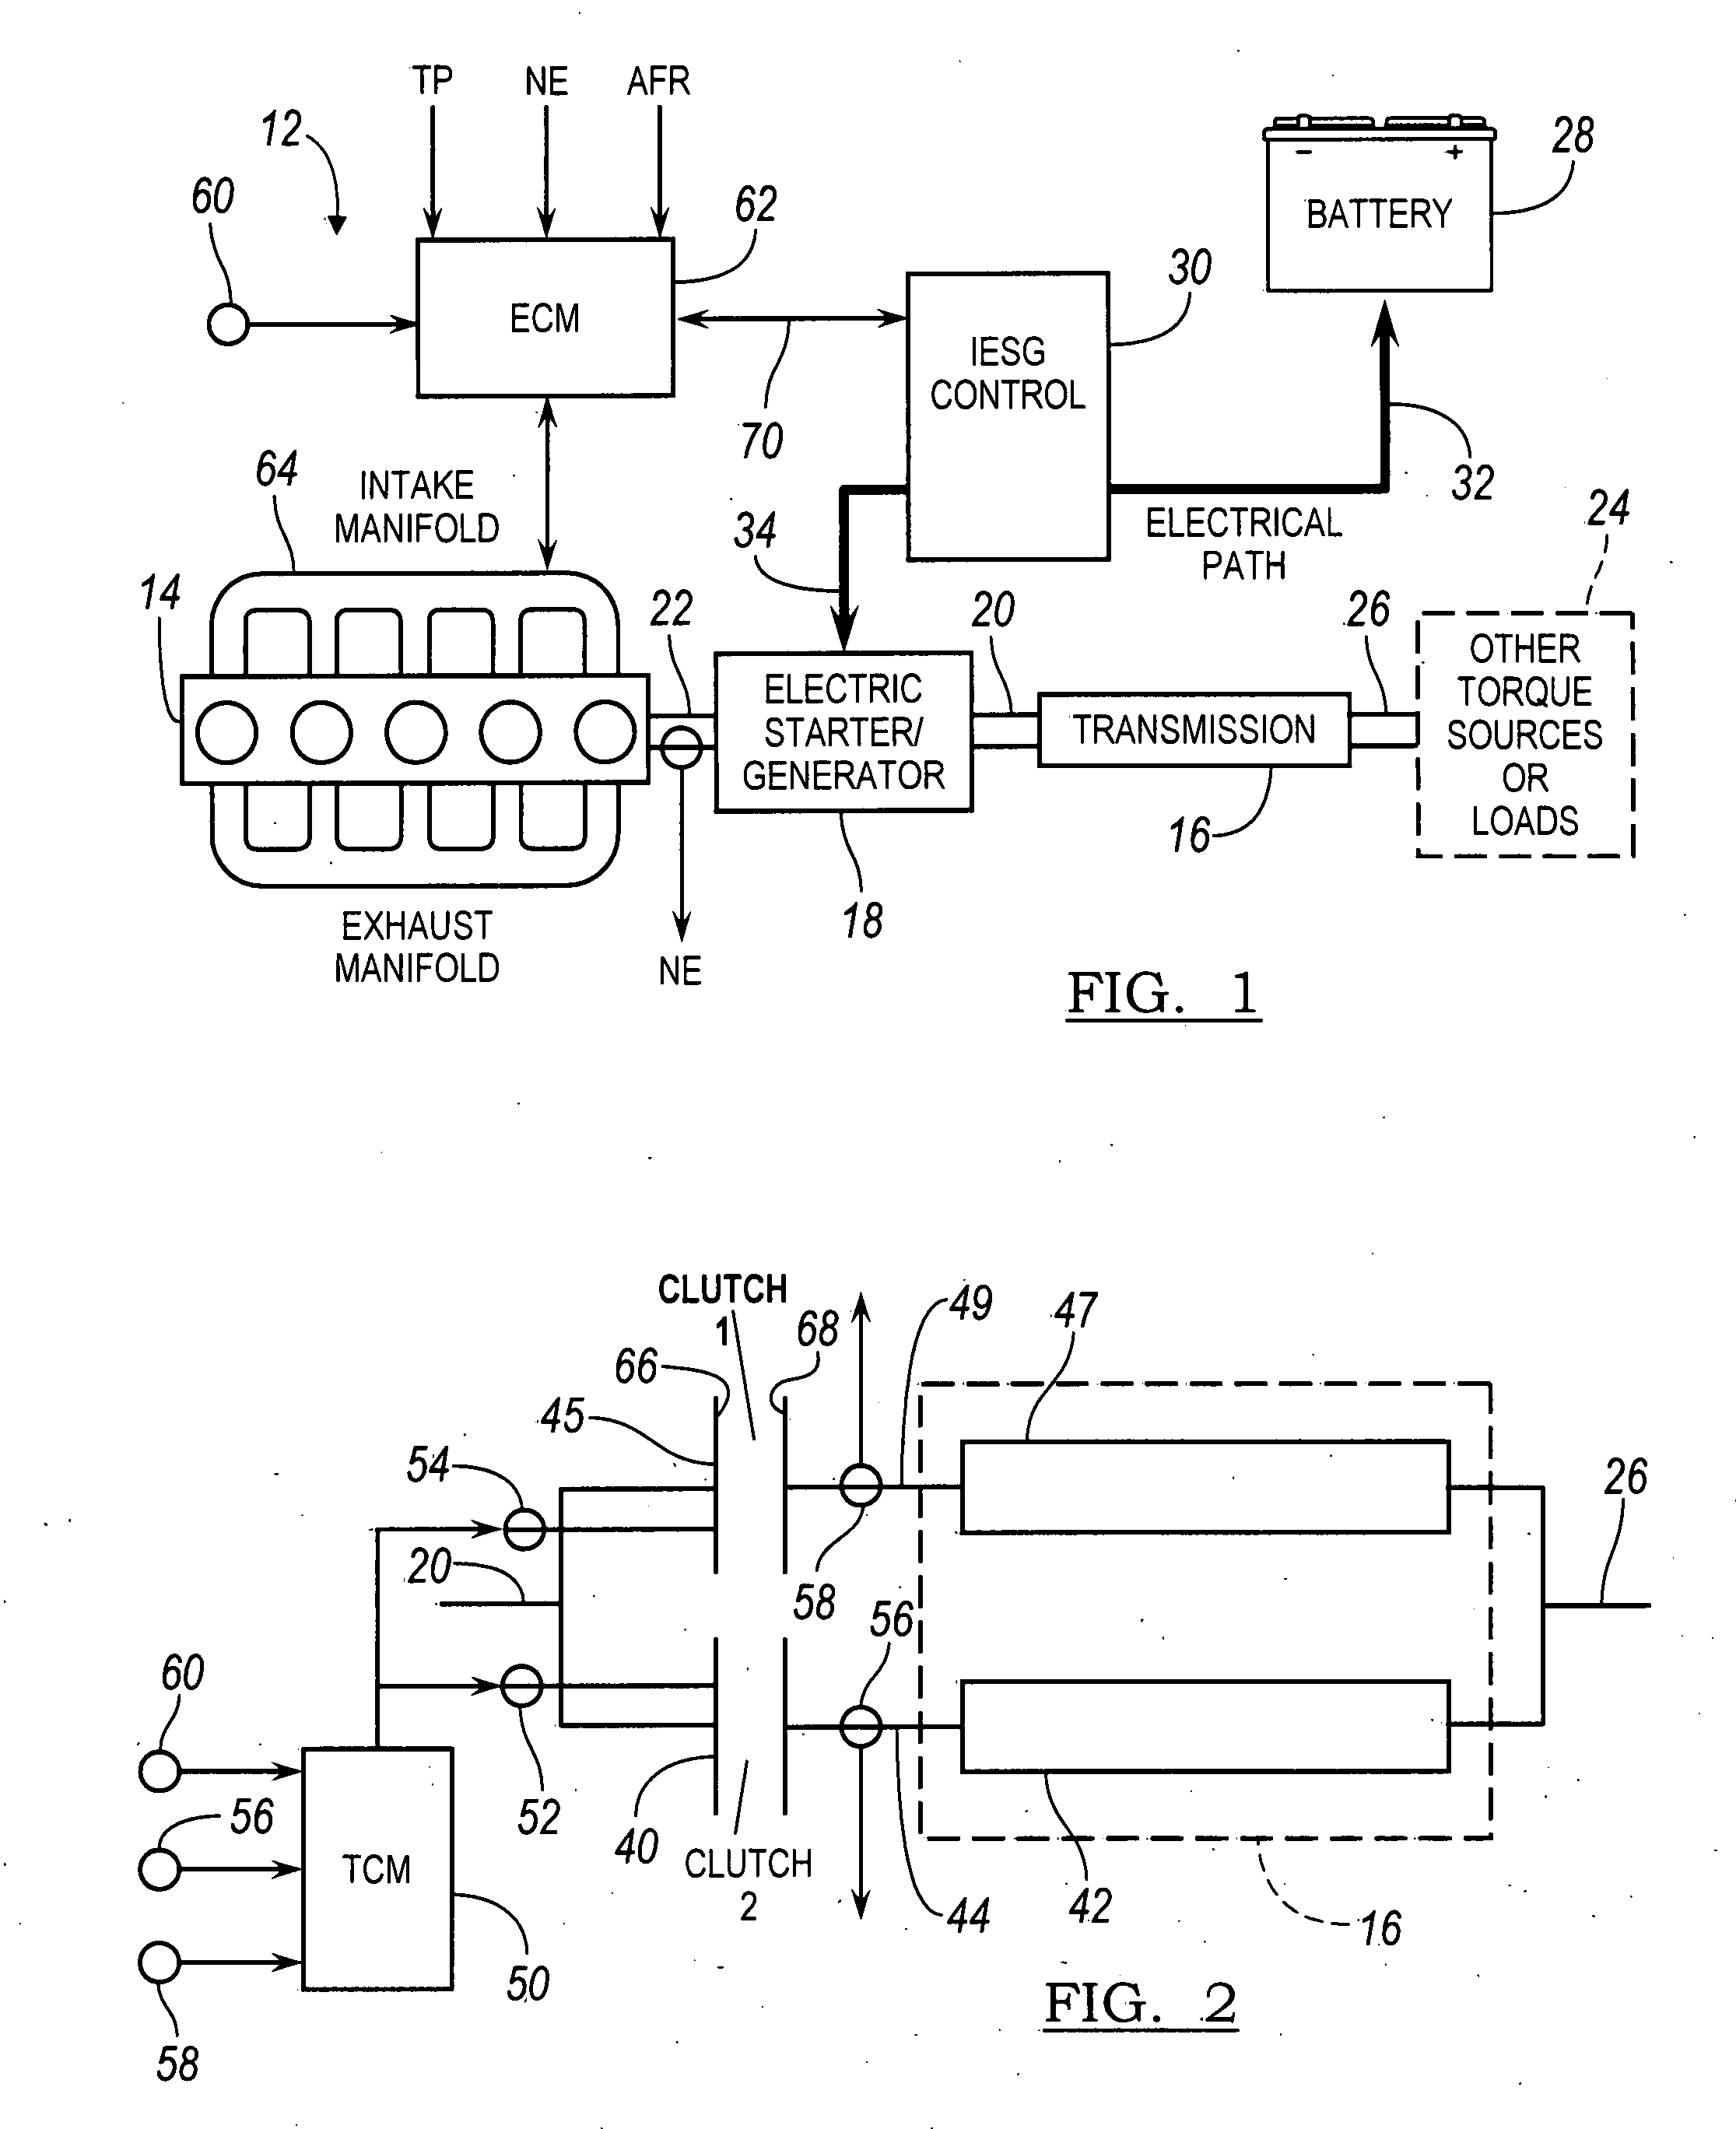 Engine start detection in a hybrid electric vehicle